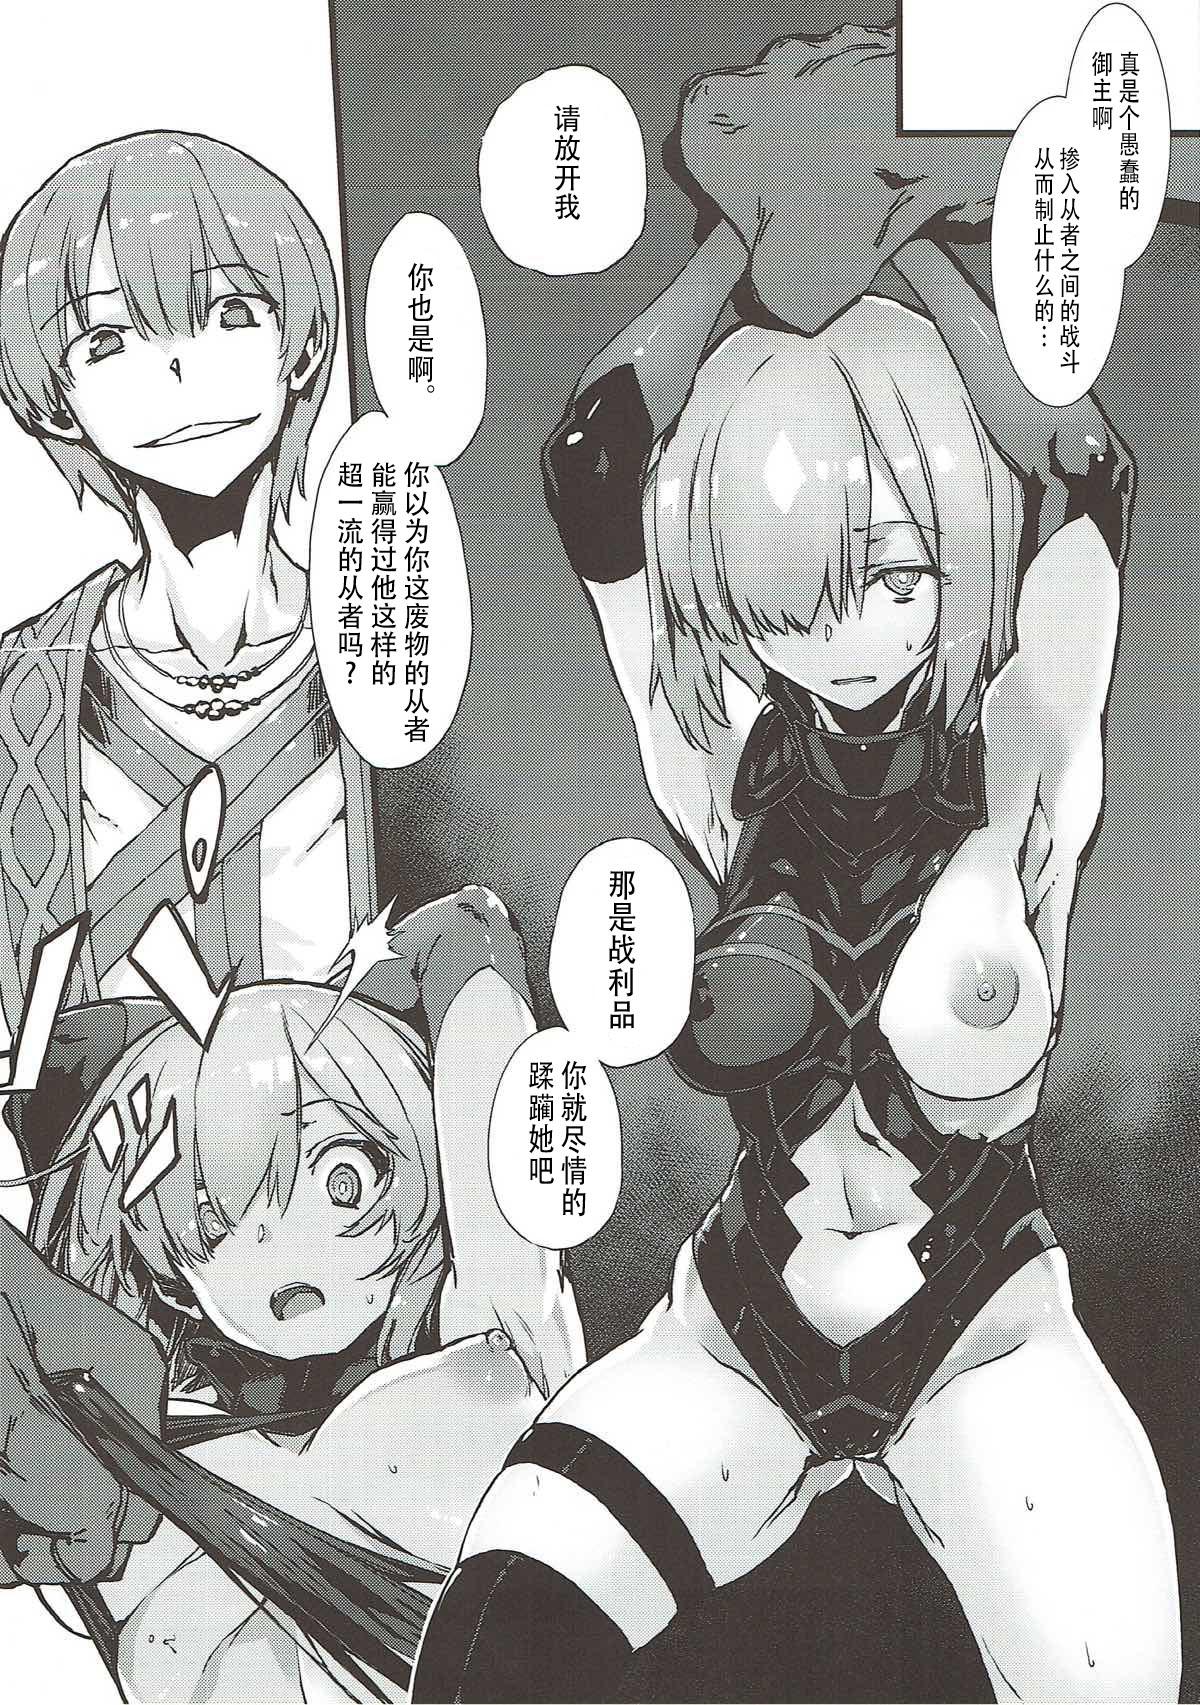 Leather Bad End Catharsis Vol. 8 - Fate grand order Gay Bang - Page 3